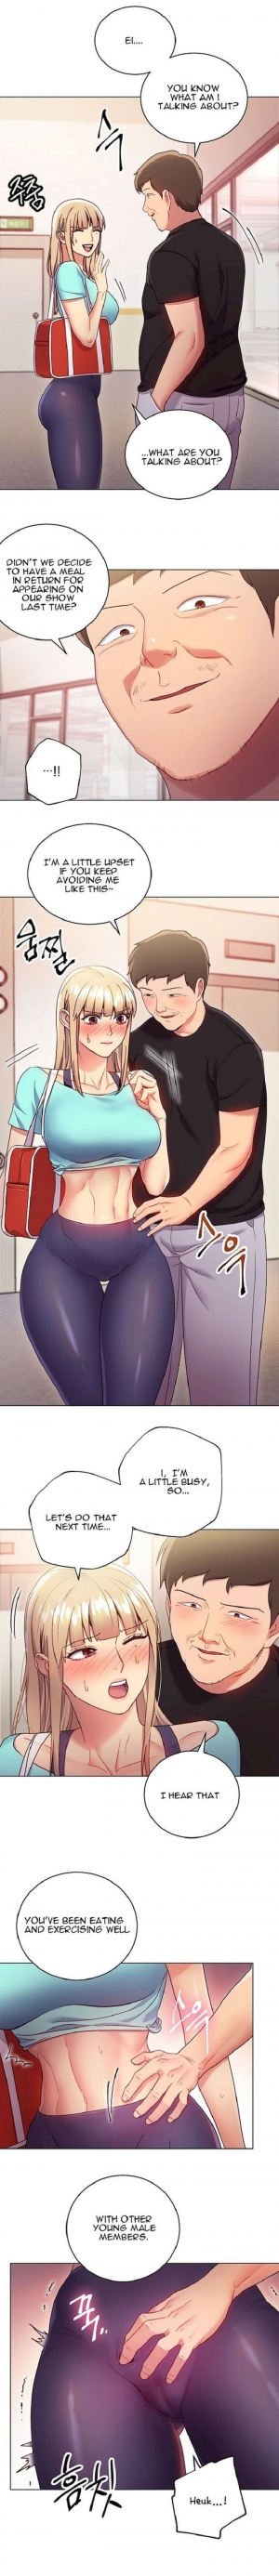  [Neck Pilllow] Stepmother Friends Ch.39/? [English] [Hentai Universe] NEW! 13/10/2020  - Page 151